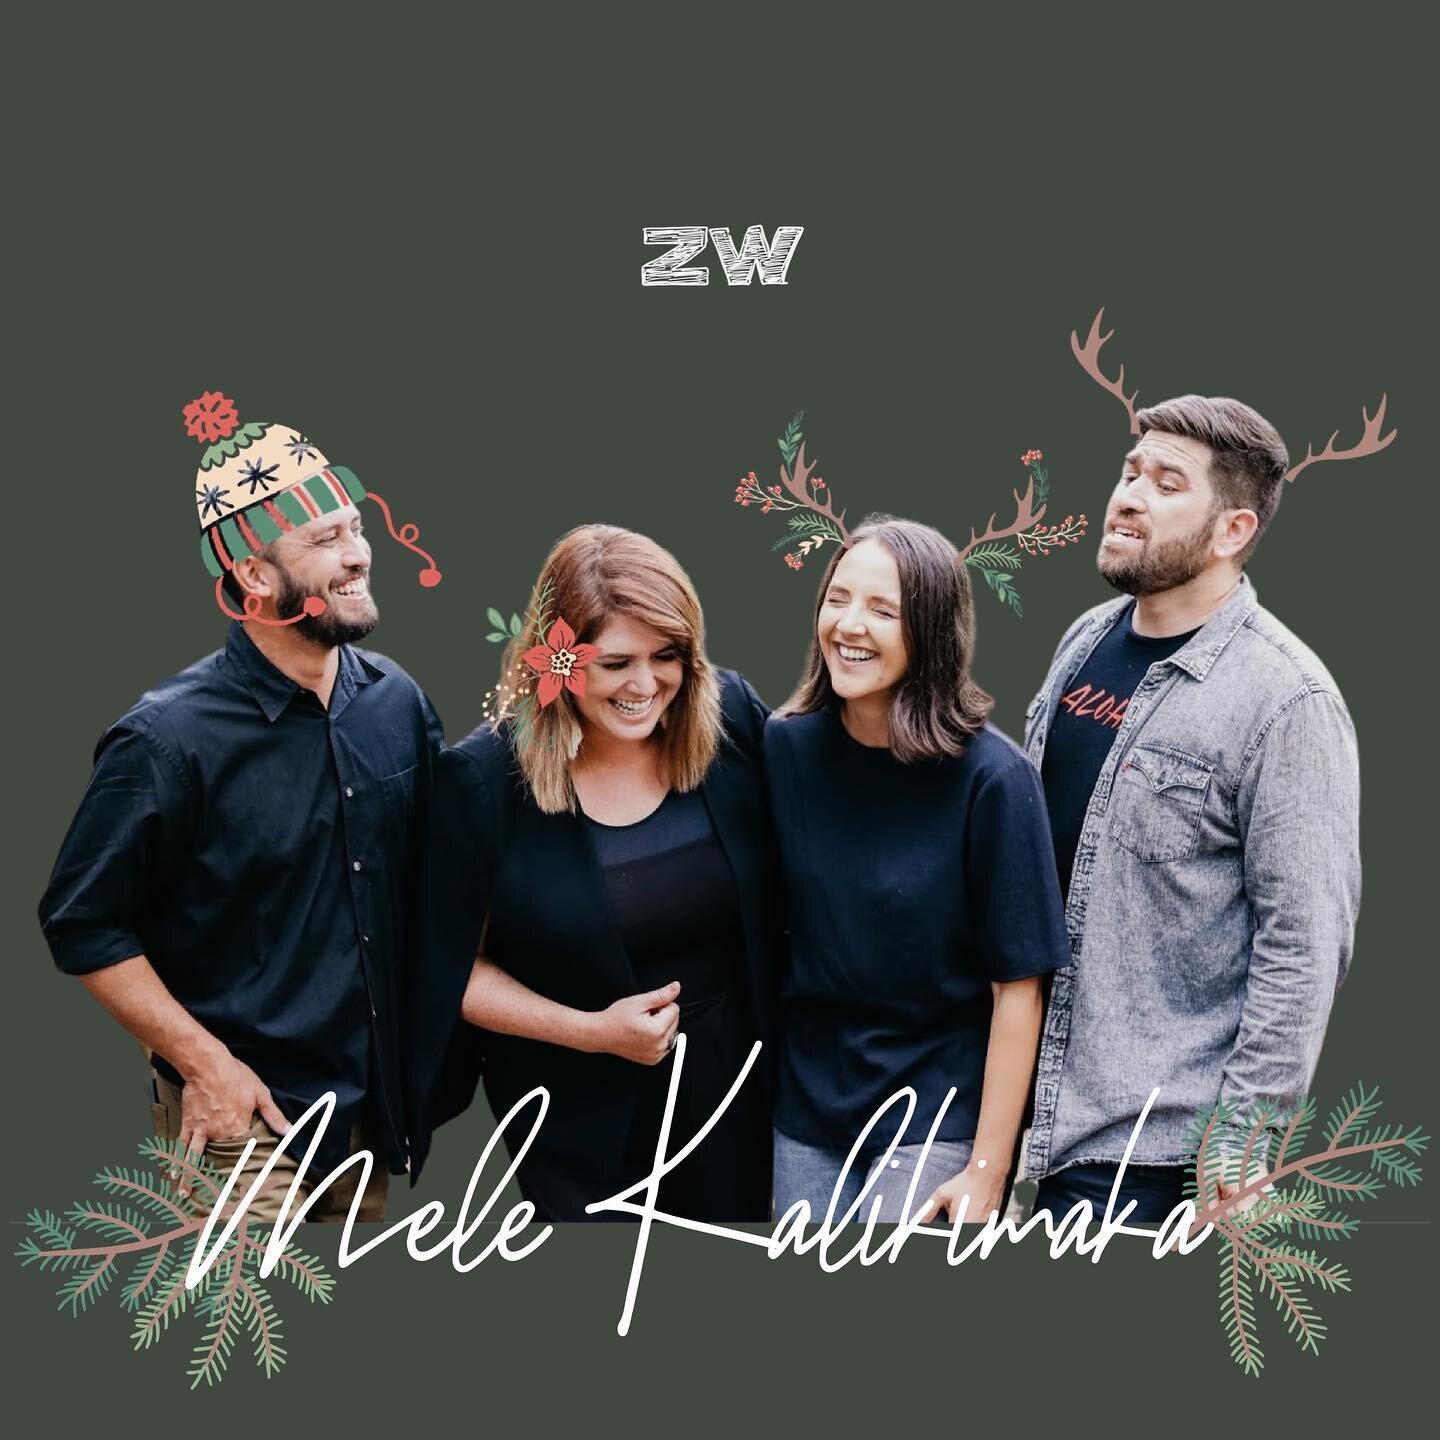 Mele Kalikimaka! Our Christmas EP for @zeo.worship &lsquo;Emanu&rsquo;ela is OUT and ABOUT! 4 Classic Christmas tunes in HAWAIIAN!

So thankful for these three and the gift to worship alongside each of them for the Lord and in our native tongue. It&r